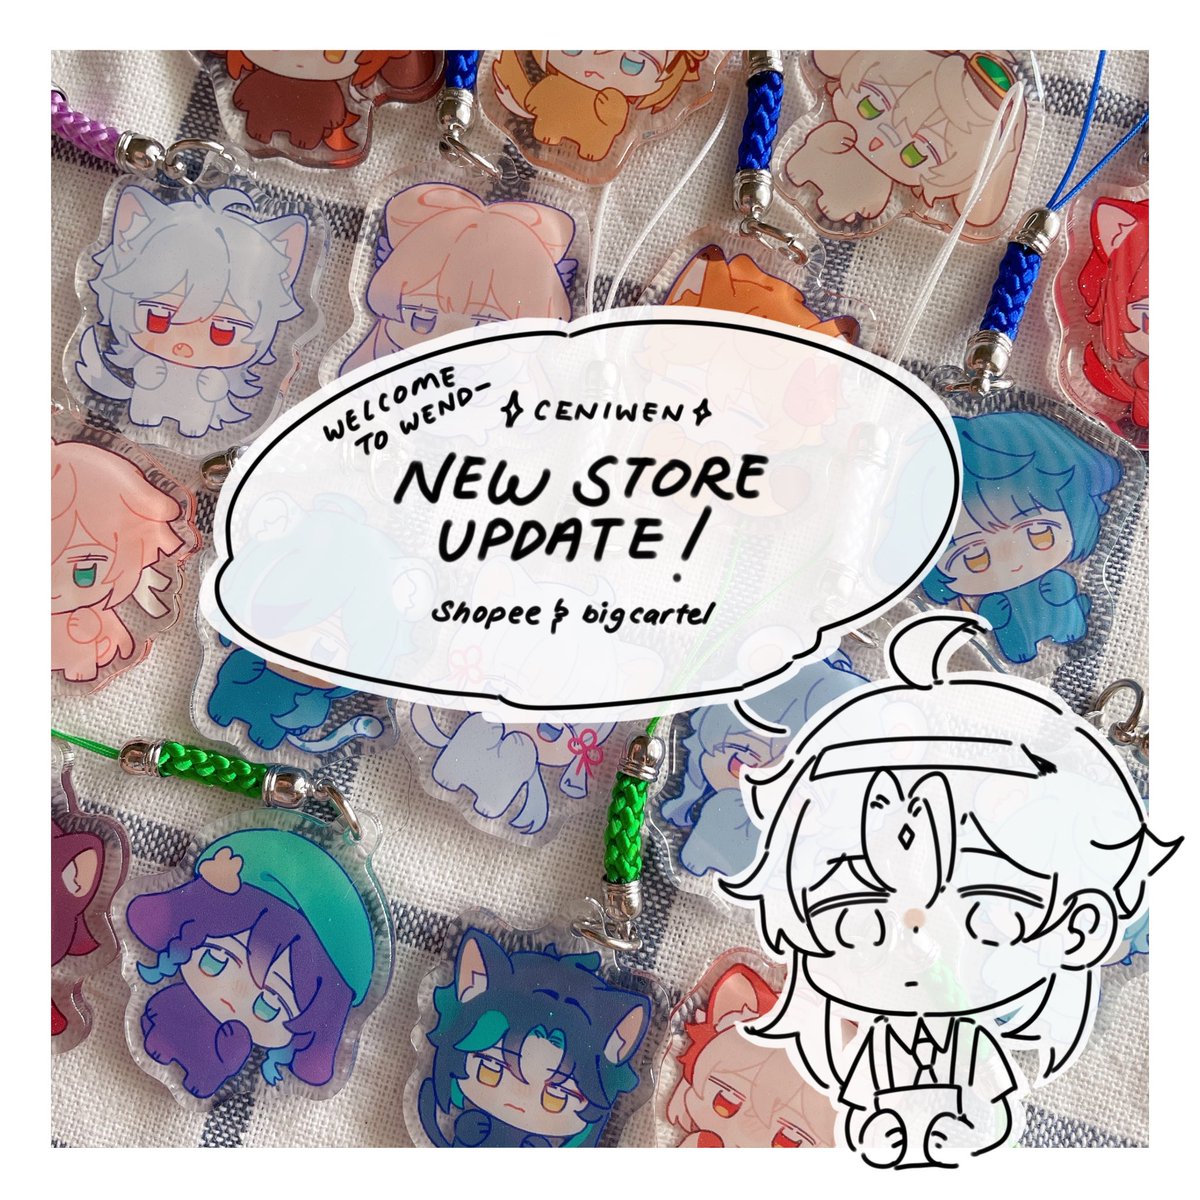 [RTs Appreciated ❣️]

Hellooo~ I've finally updated and opened my online store 😭 I now ship worldwide!! Charms are limited but I will open preorders after ^o^ Links are in replies

#原神 